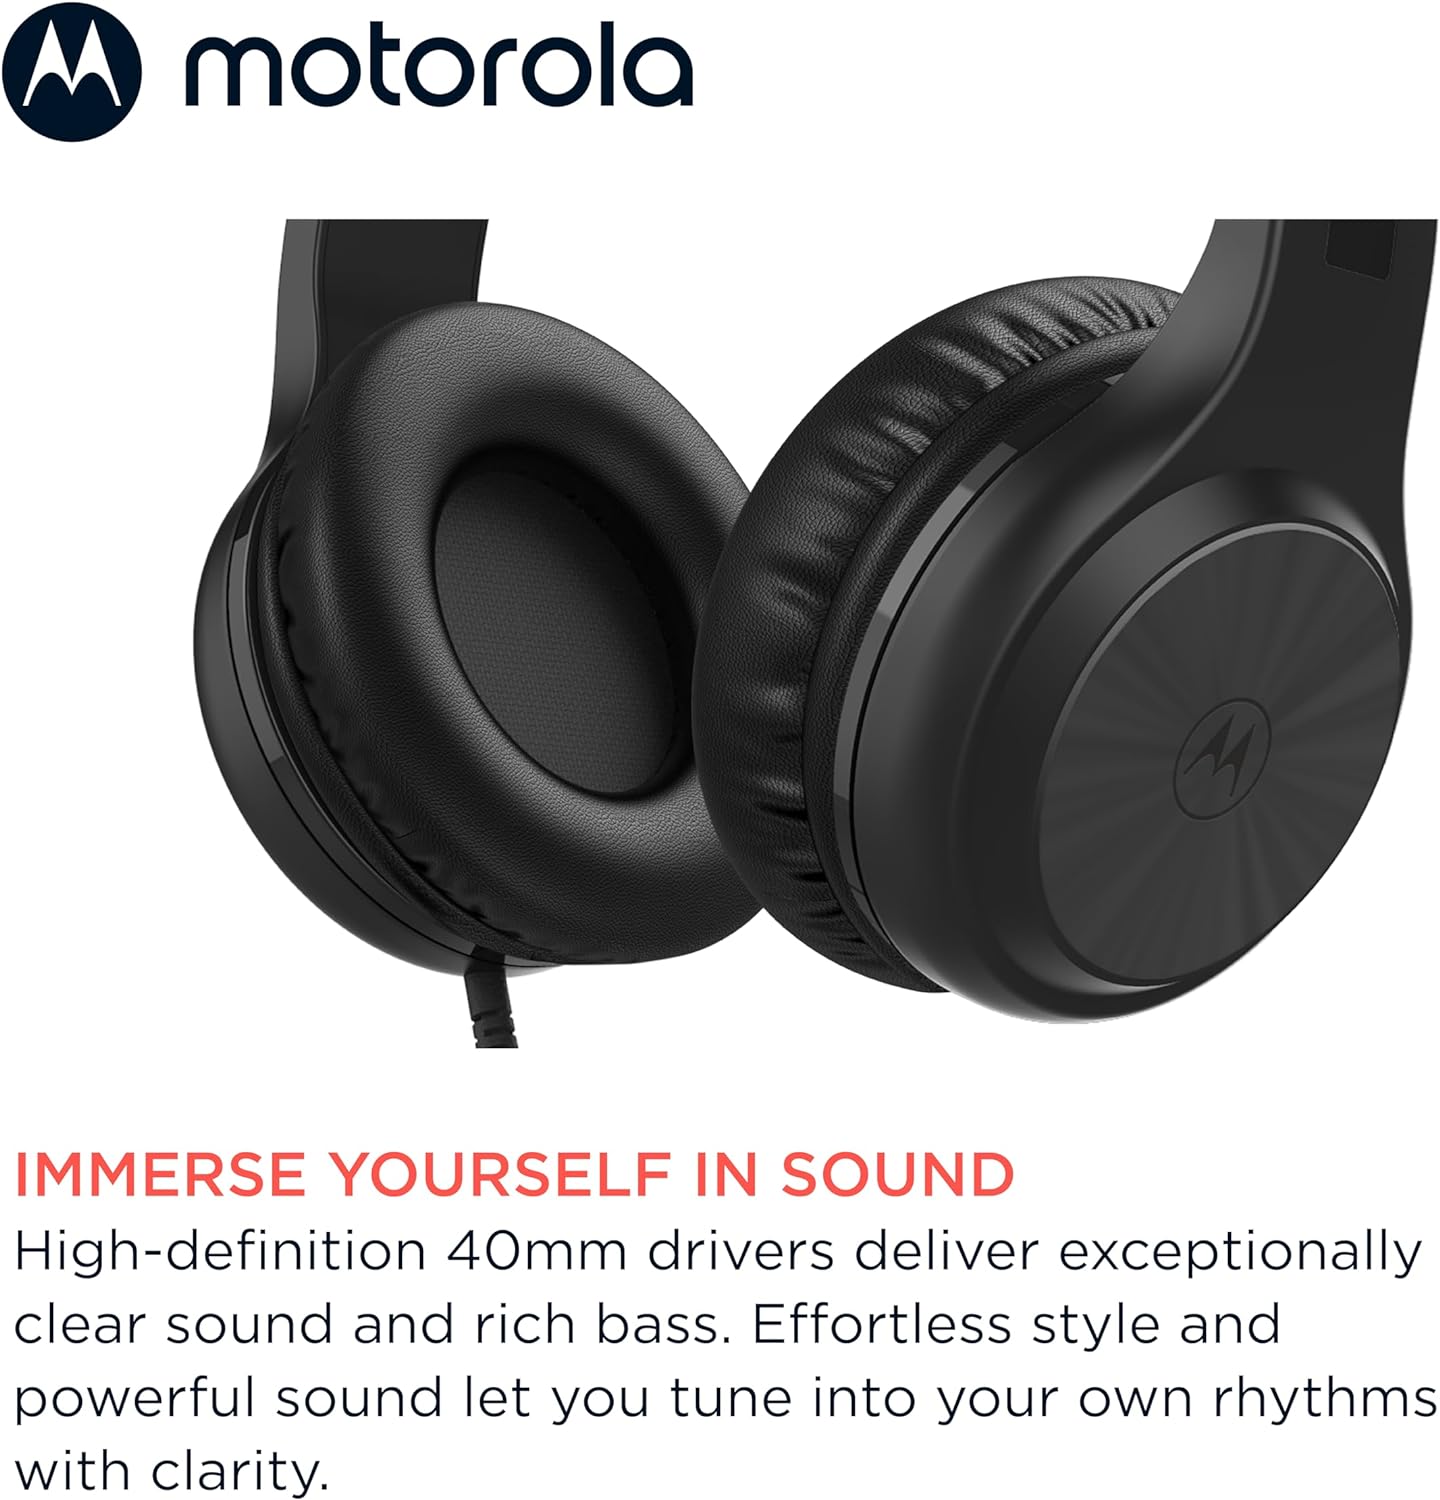 Motorola Over-Ear Headphones Wired - Moto XT120 Headphones with Microphone, in-Line Control for Calls - Foldable Head Phones, Adjustable Cushioned Headband - Dynamic Bass, Clear Sound - White